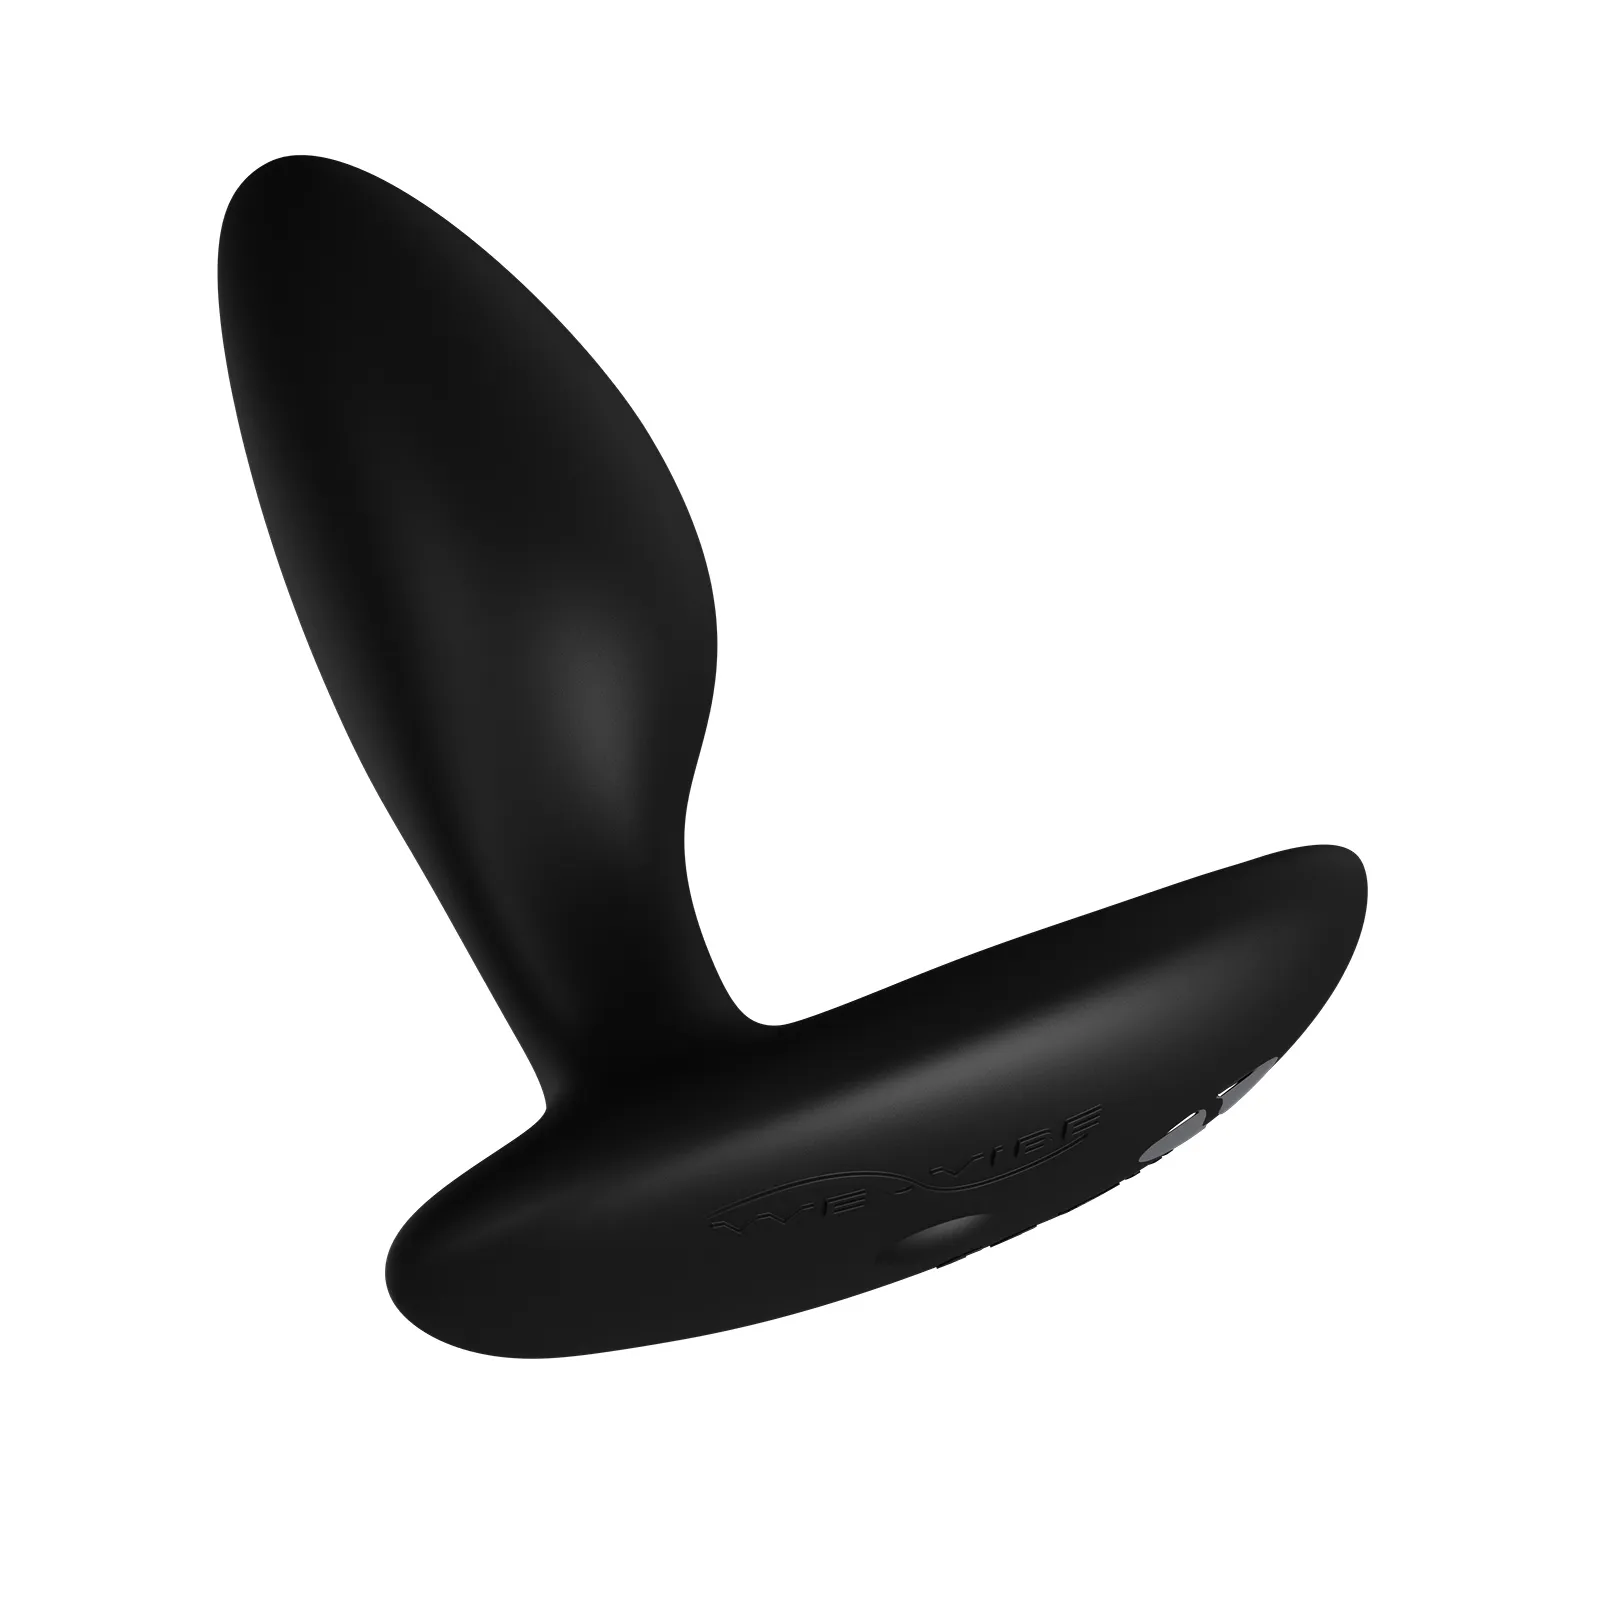 We-Vibe Ditto+ black 